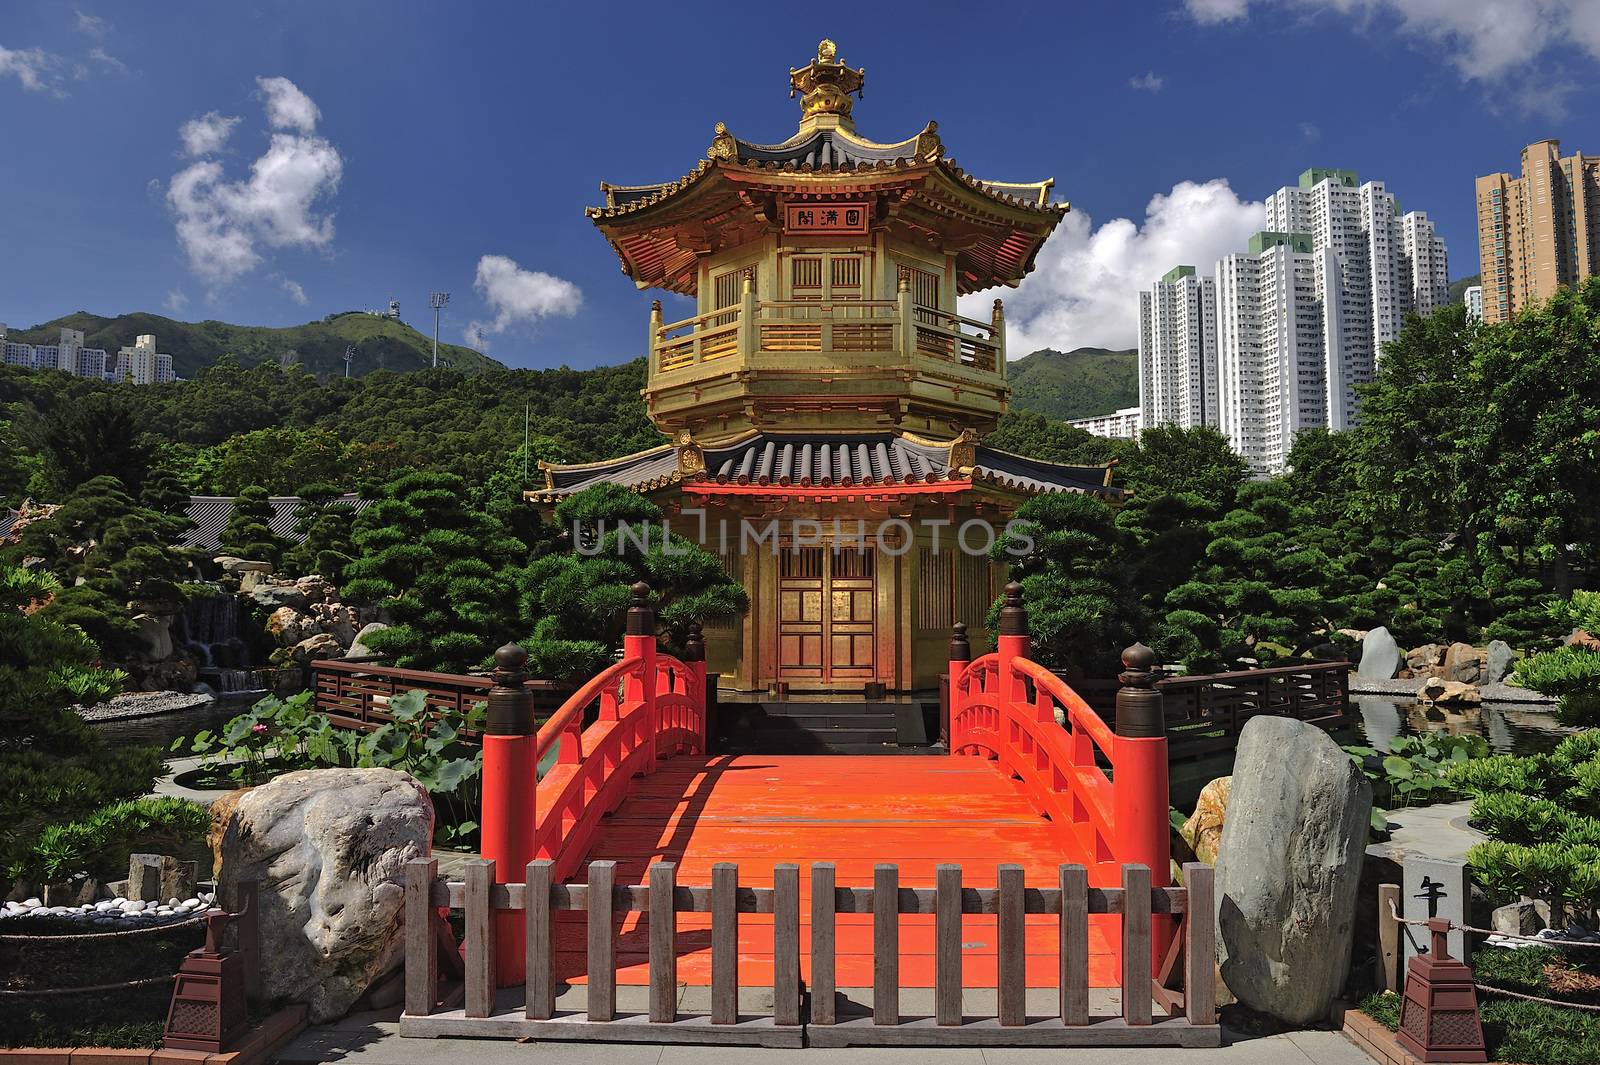 The Pavilion of Absolute Perfection in the Nan Lian Garden, Hong by think4photop